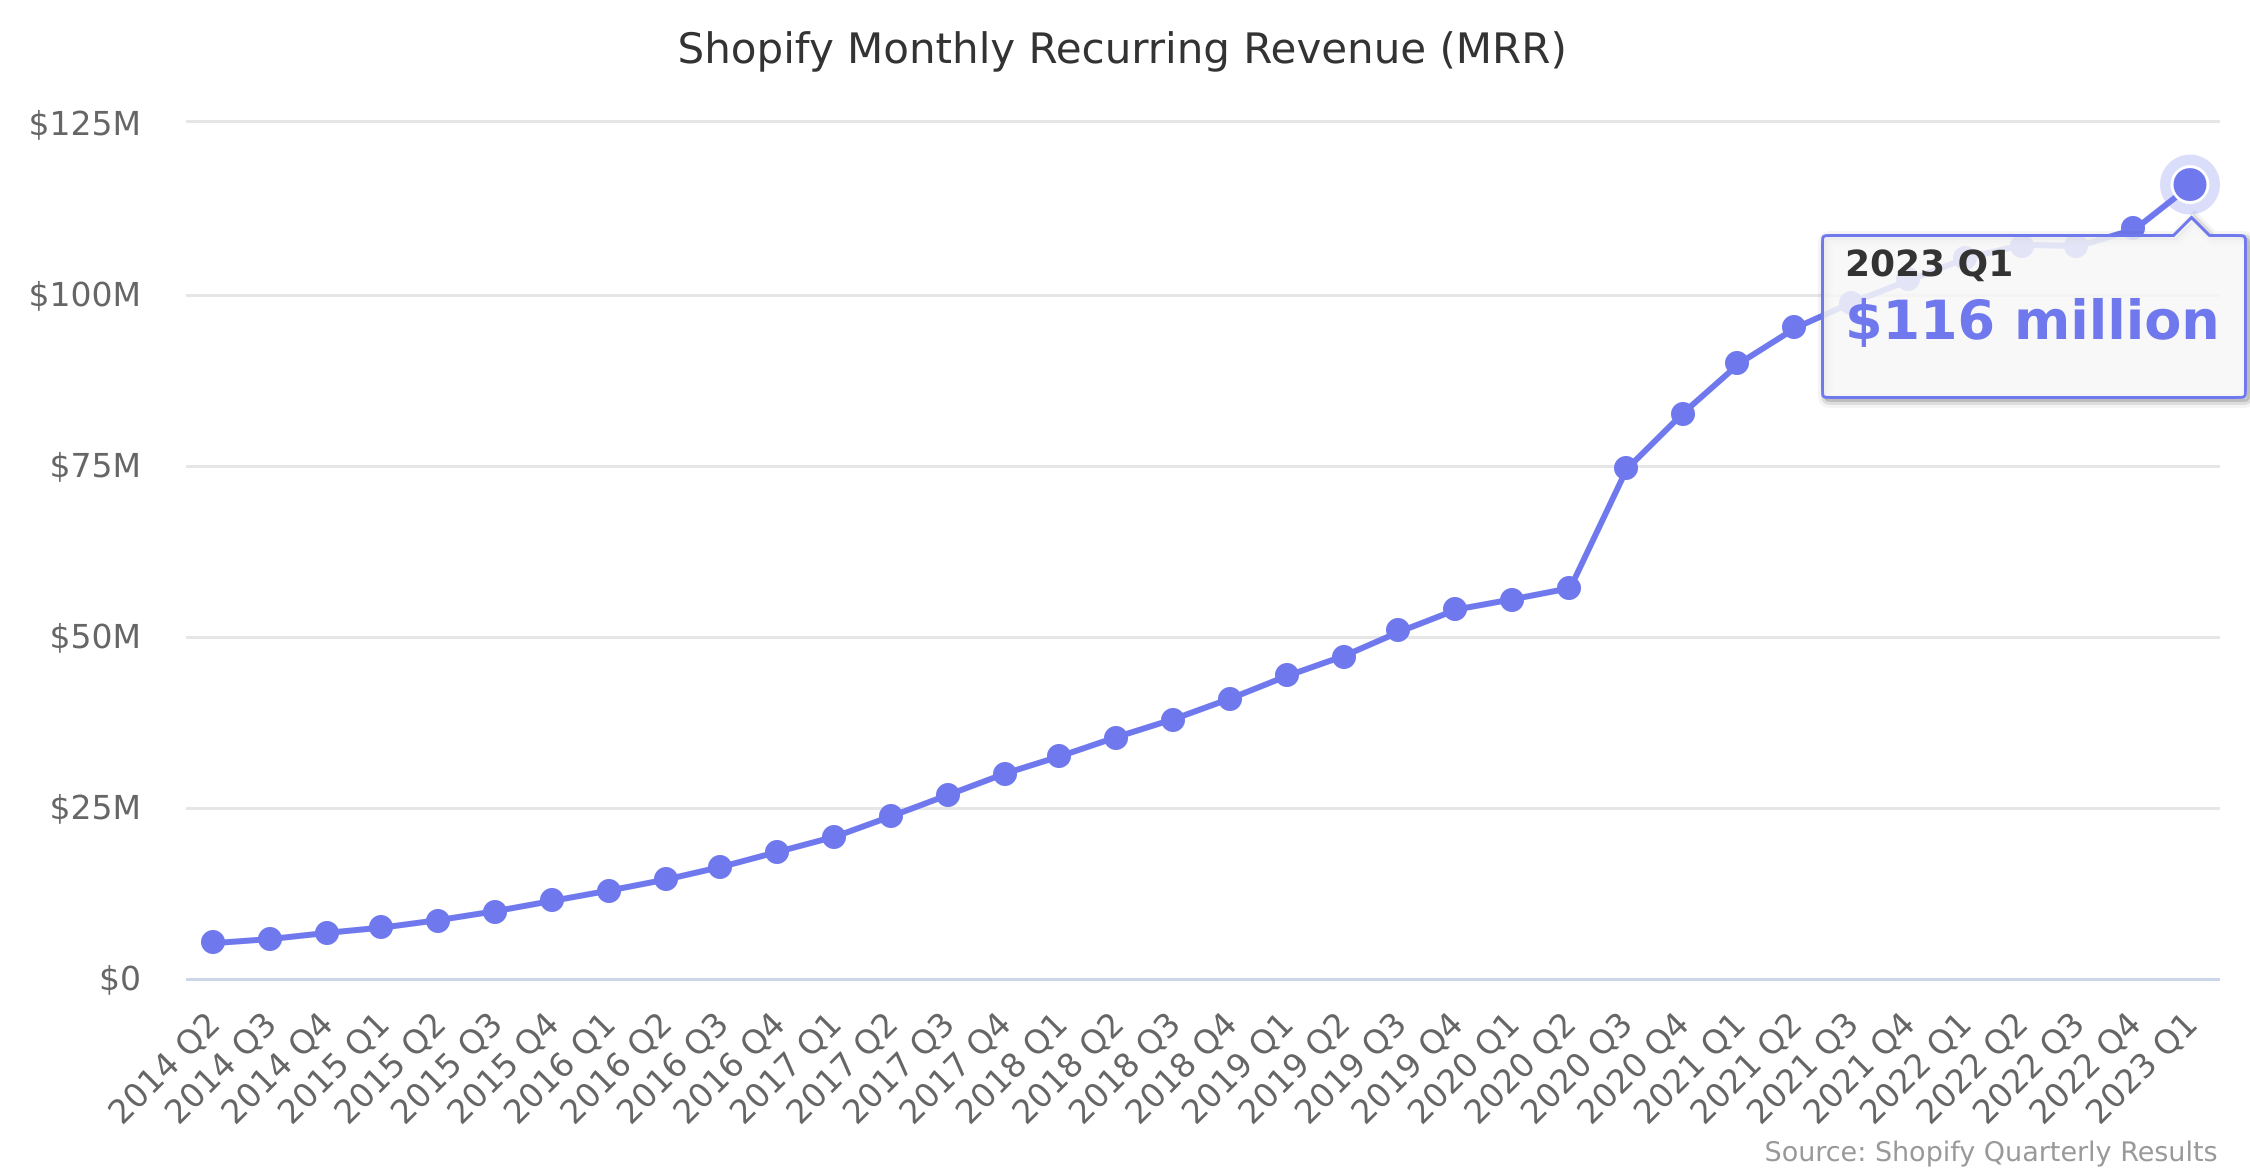 Shopify Monthly Recurring Revenue (MRR) 2014-2022